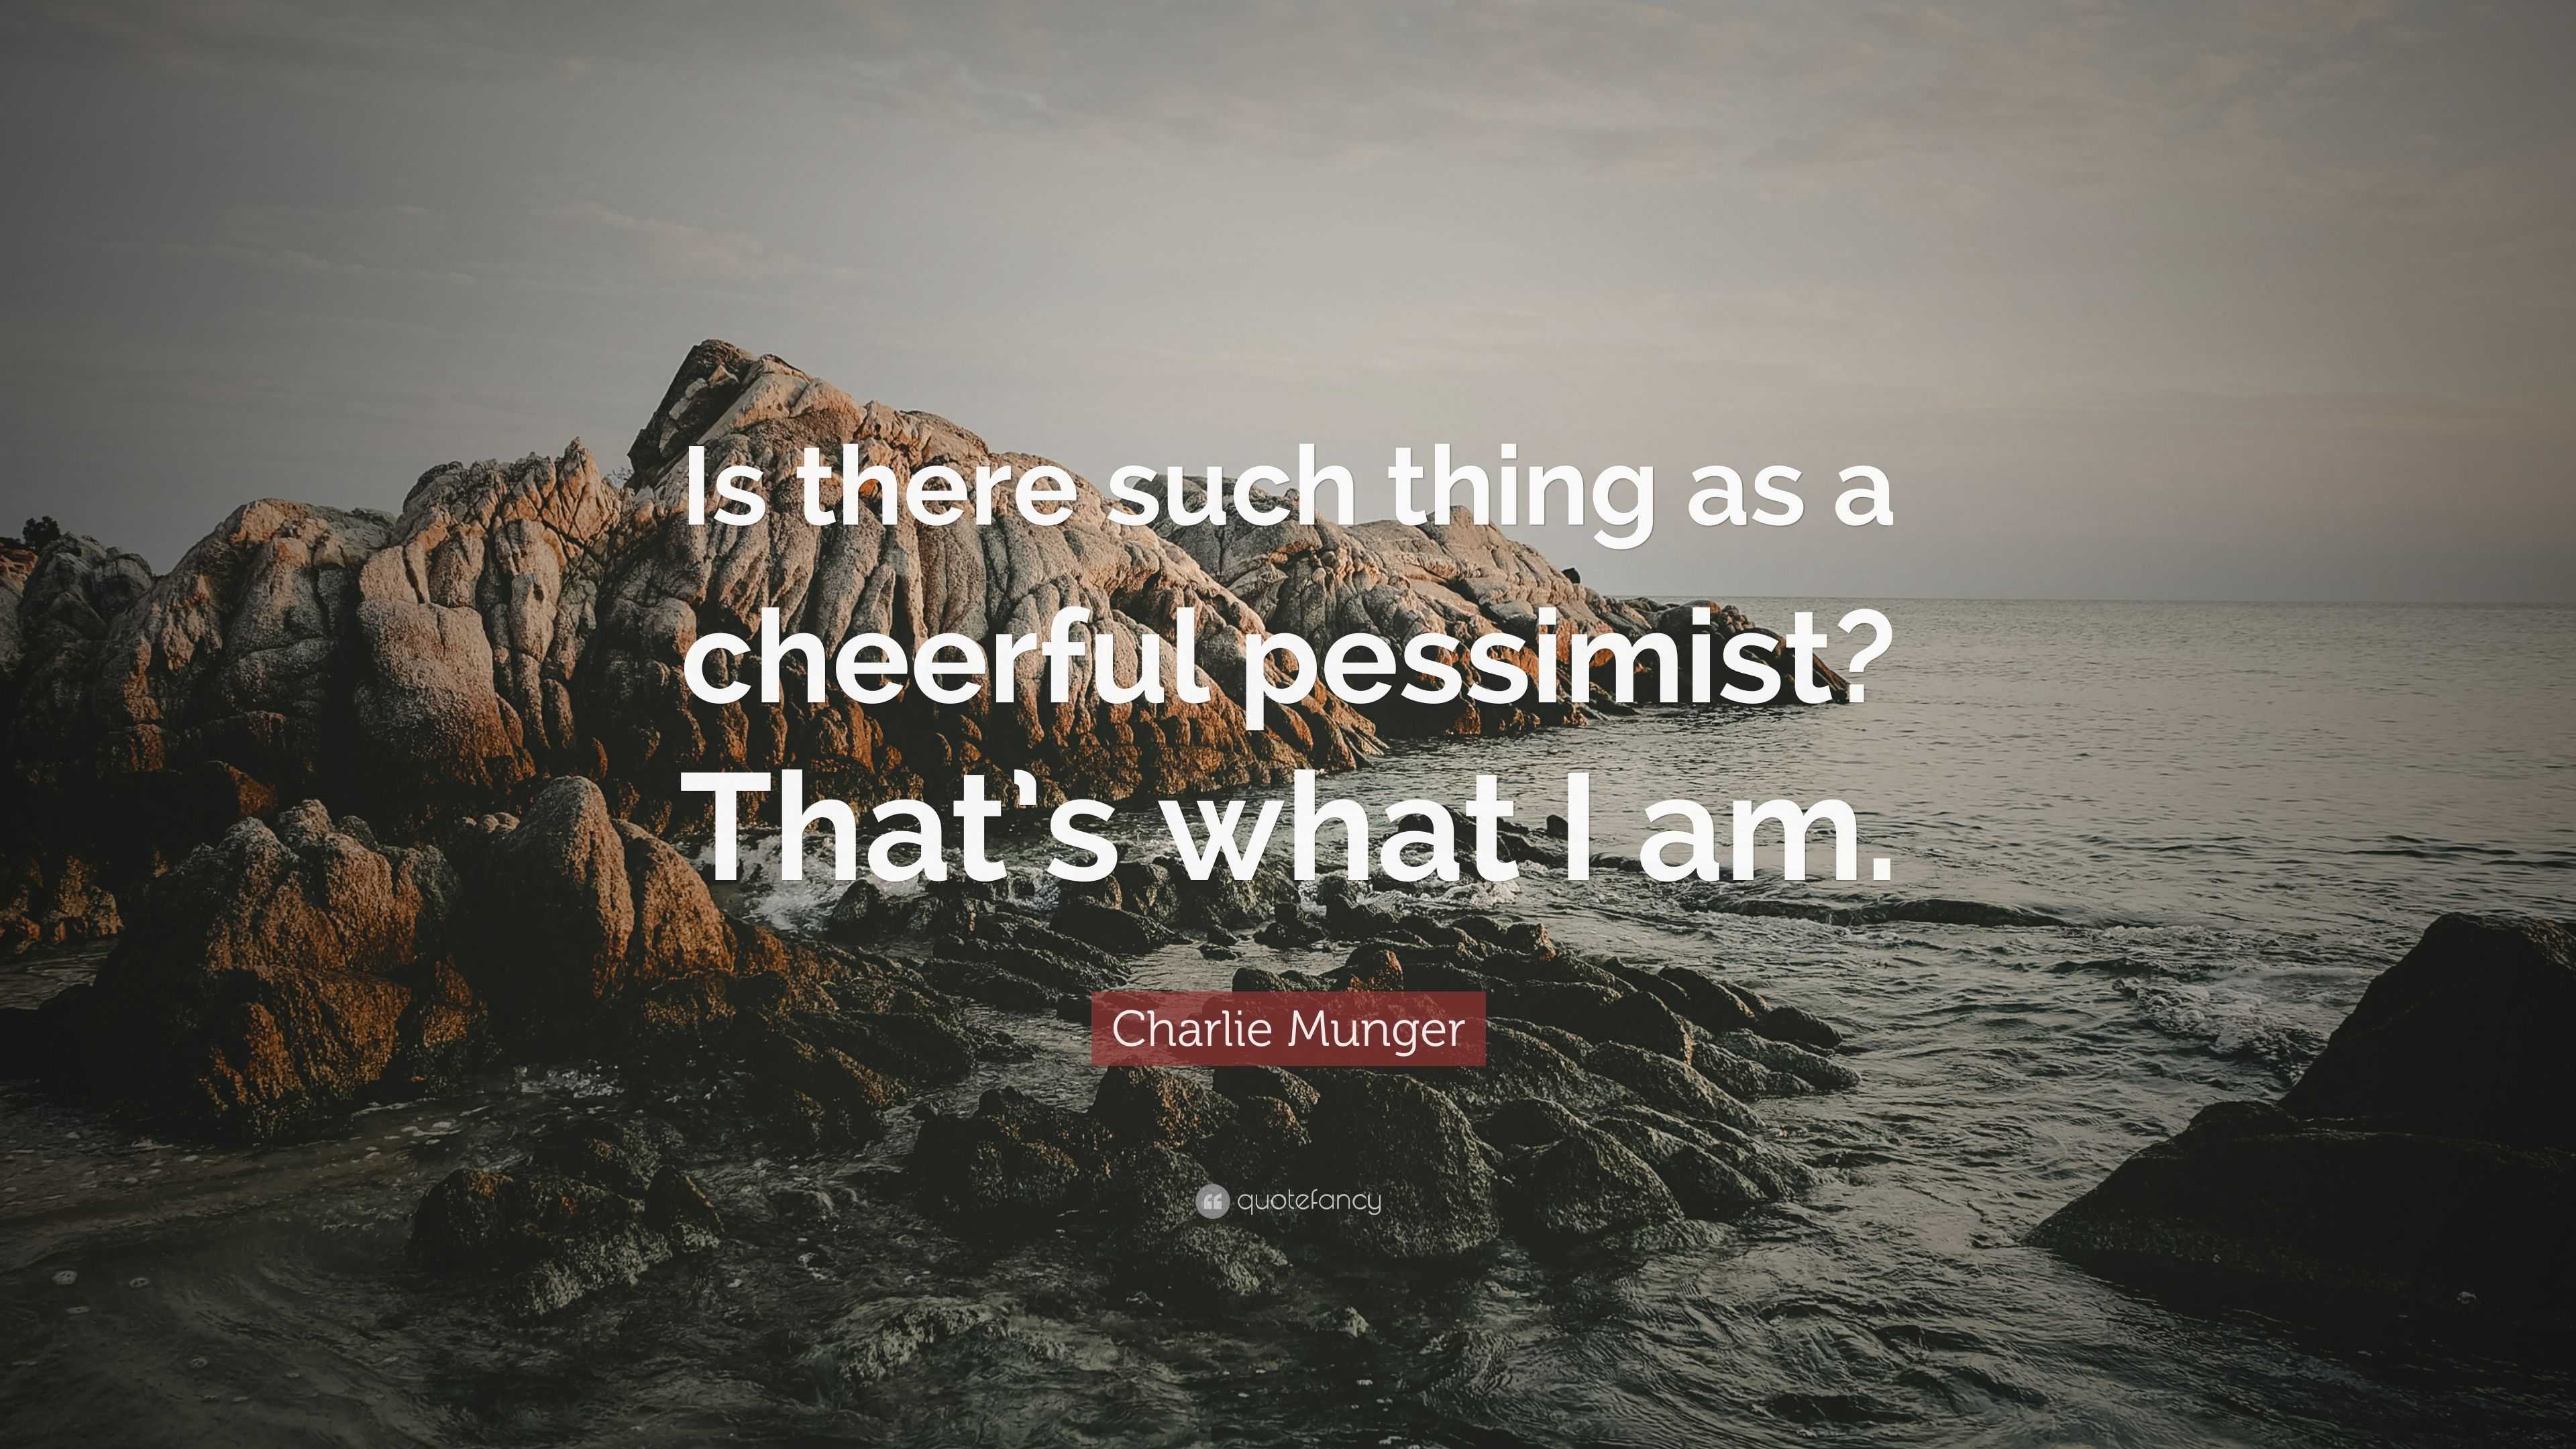 Charlie Munger Quote “is There Such Thing As A Cheerful Pessimist That’s What I Am ”